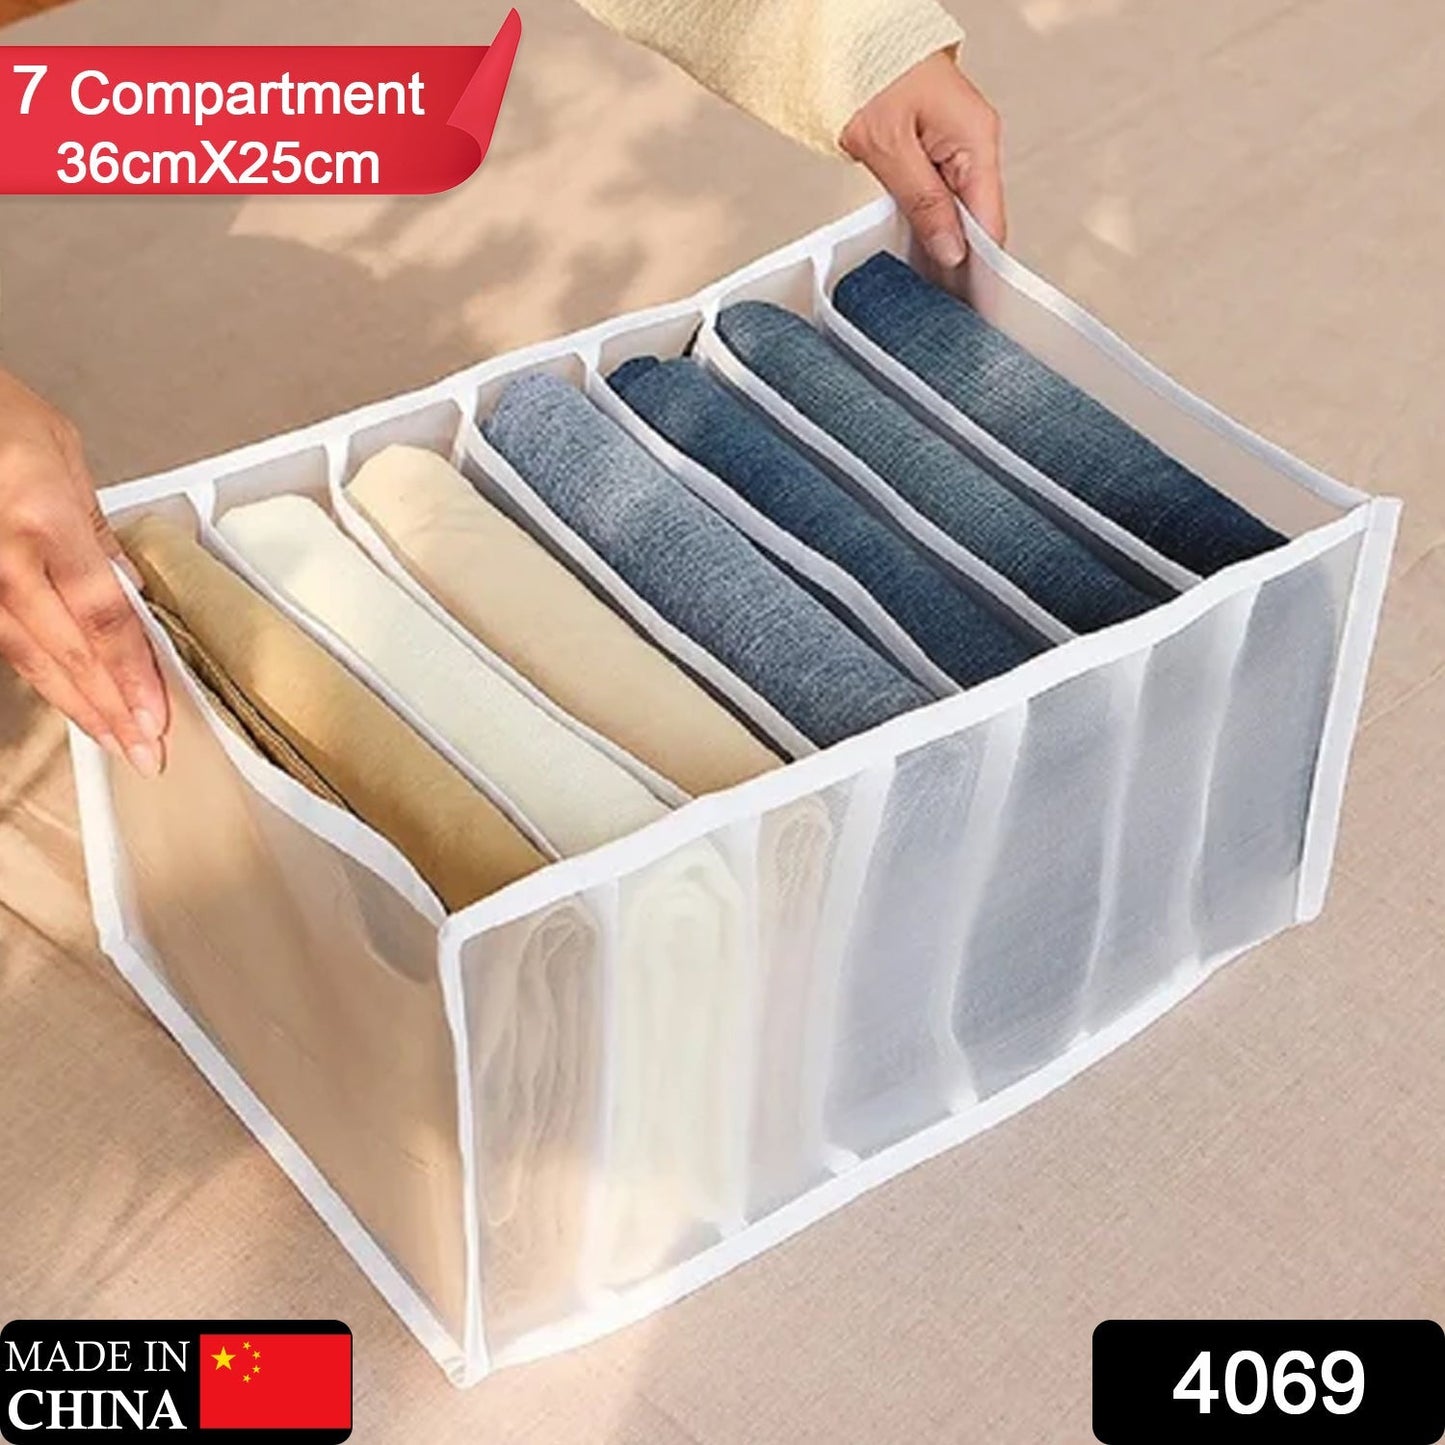 4069 Clothes Organizer +7 Grid, Drawer Wardrobe Clothes Organizer, Jeans Closet Cabinet Organizers, Portable Foldable Storage Containers 